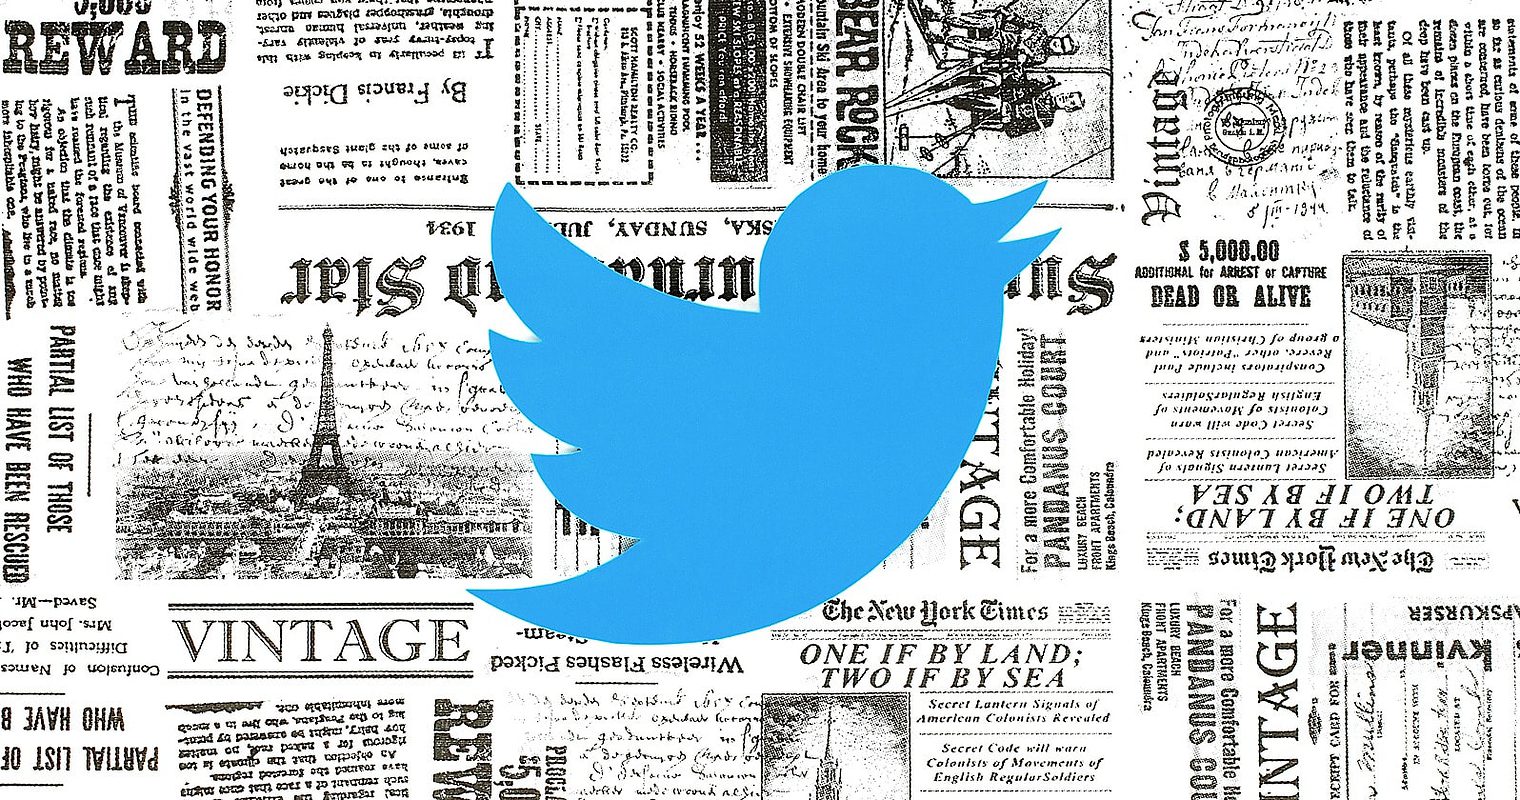 Twitter to Display News Articles More Prominently